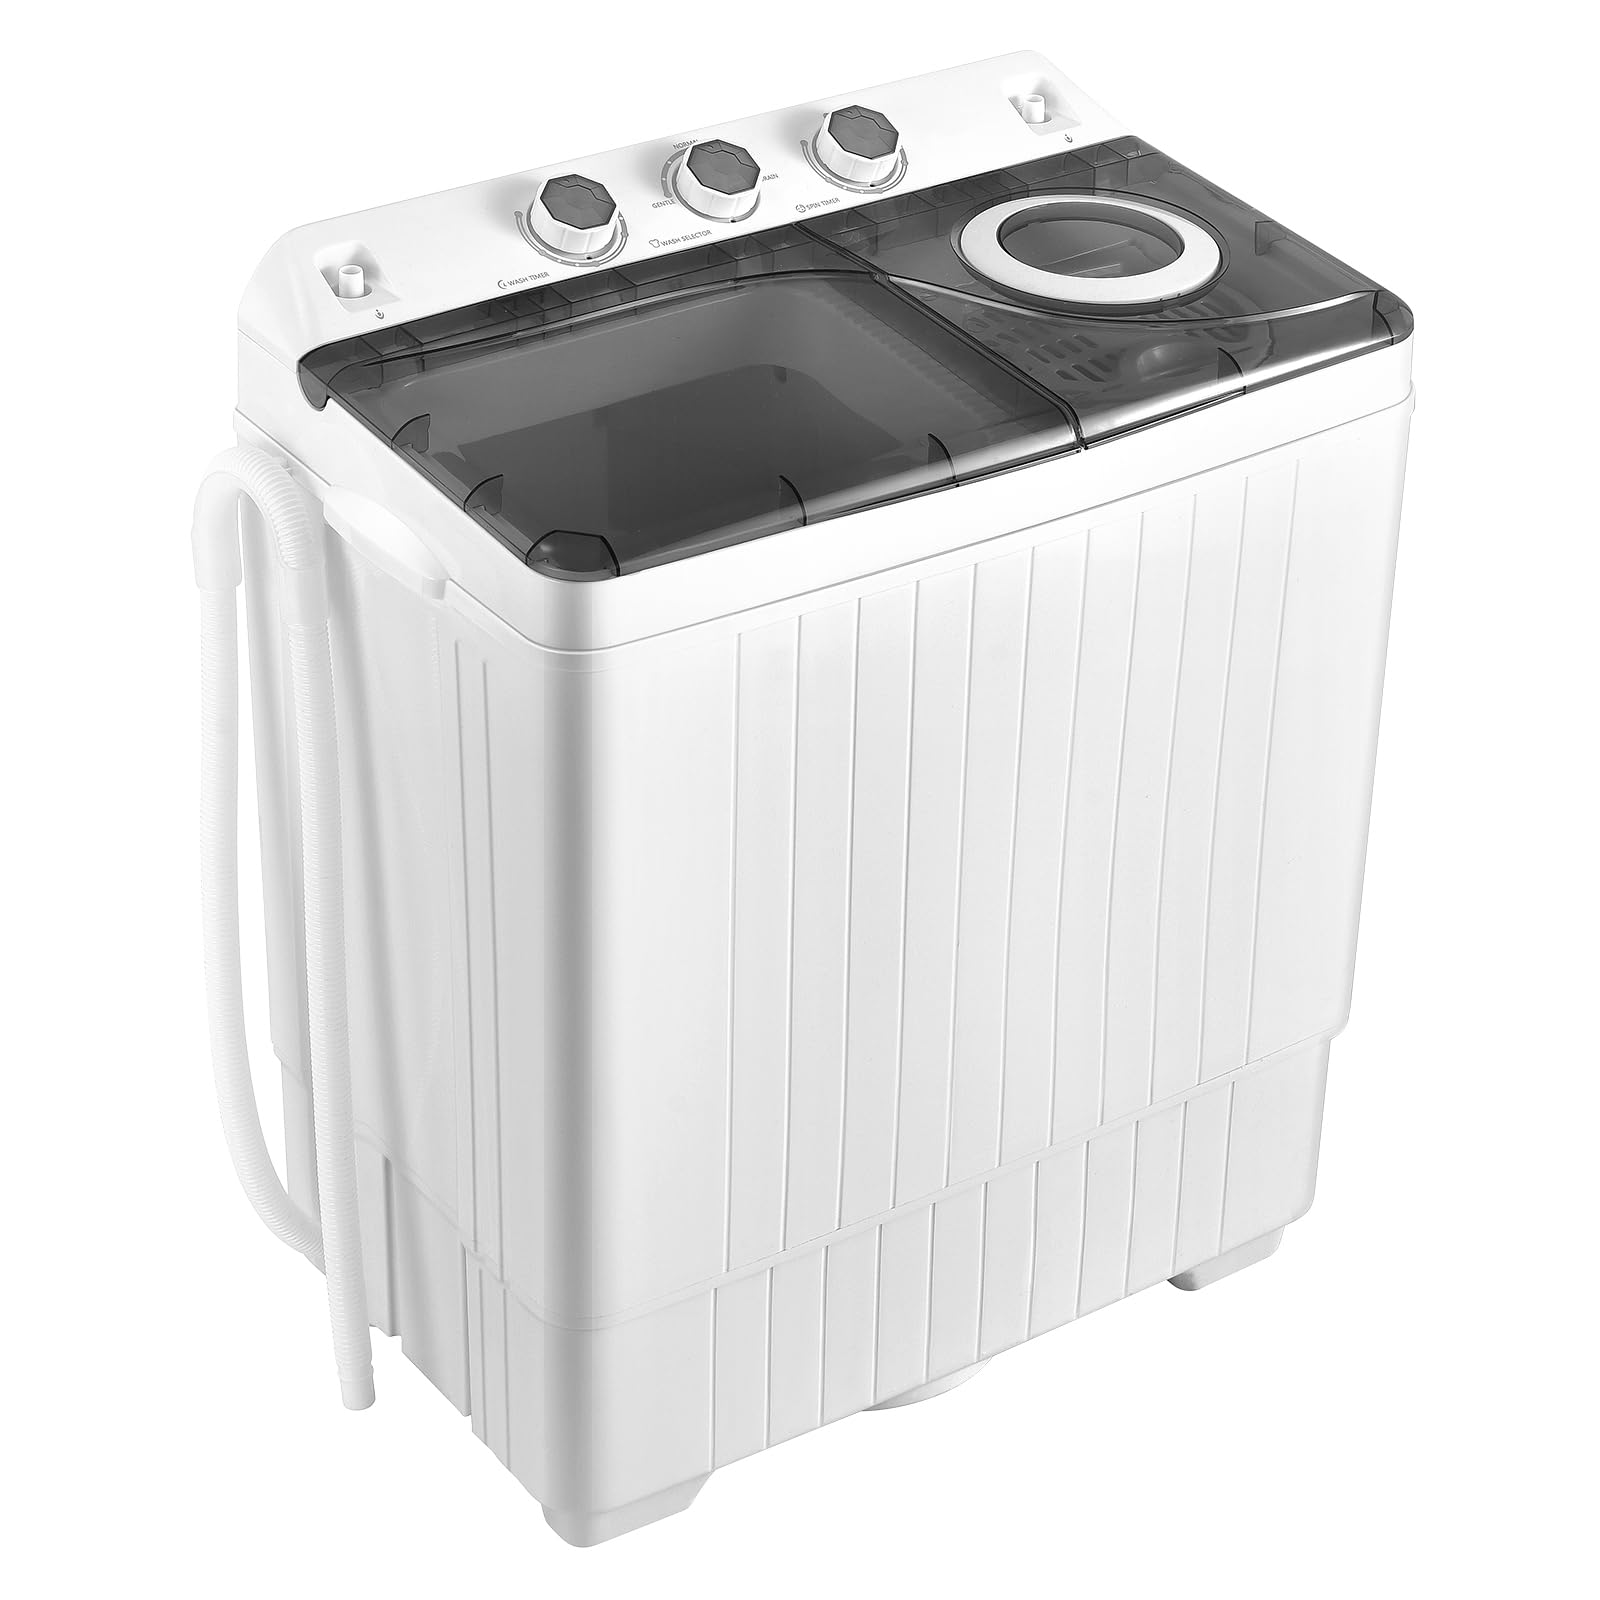 26 lbs Twin Tub Portable Washing Machine with Built-In Drain Pump-Gray | Costway